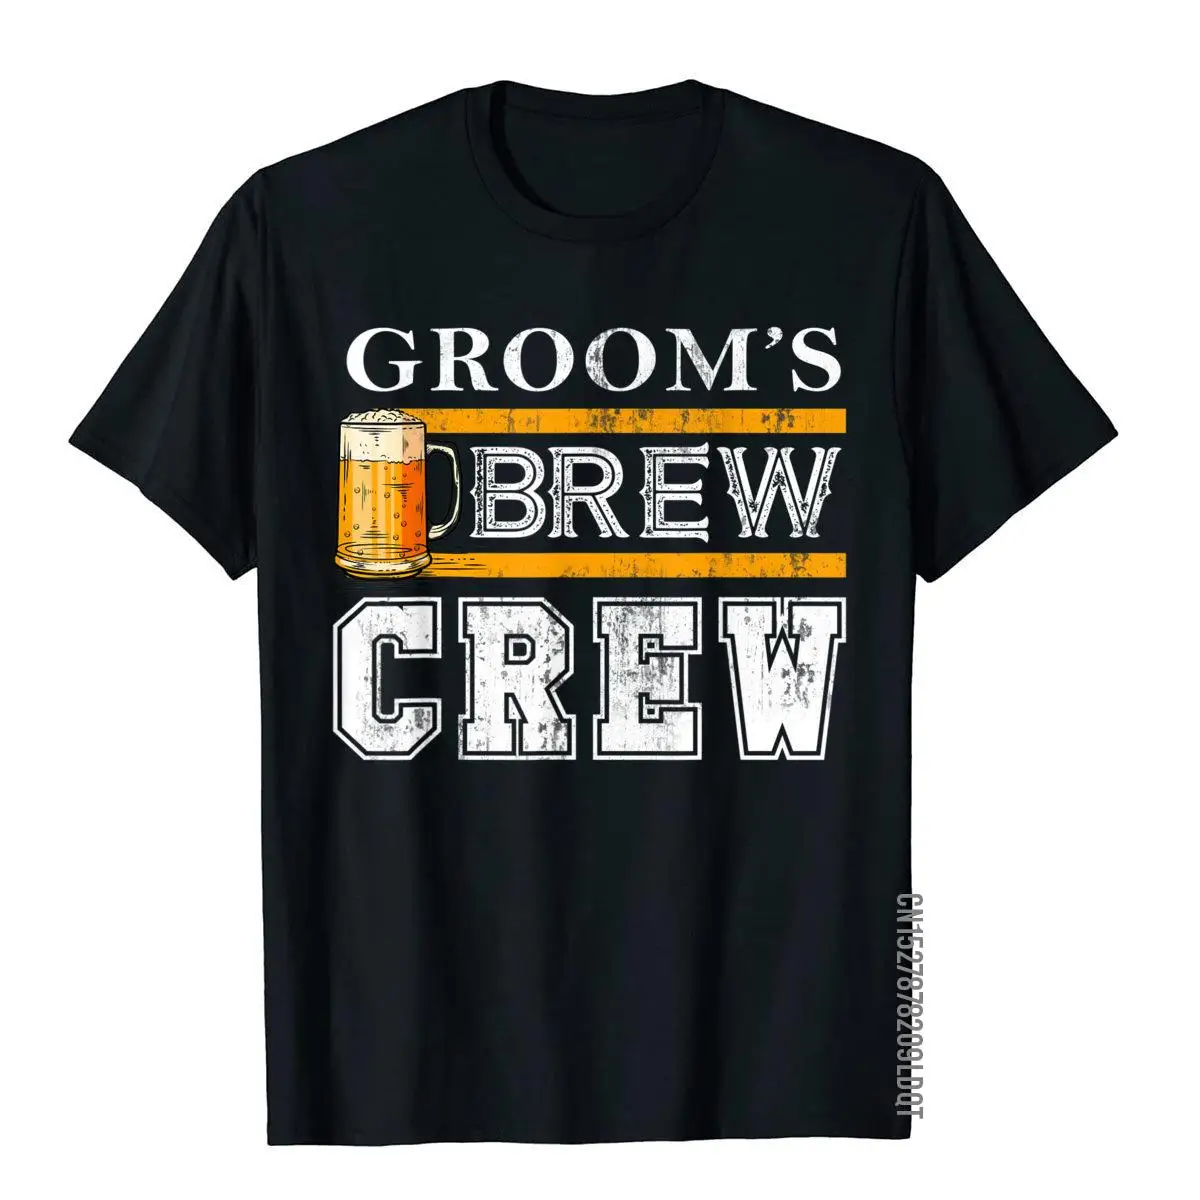 

Groom's Brew Crew Funny Groomsmen Beer Team Bachelor Party T-Shirt Top T-Shirts High Quality Cotton T Shirt Summer For Men